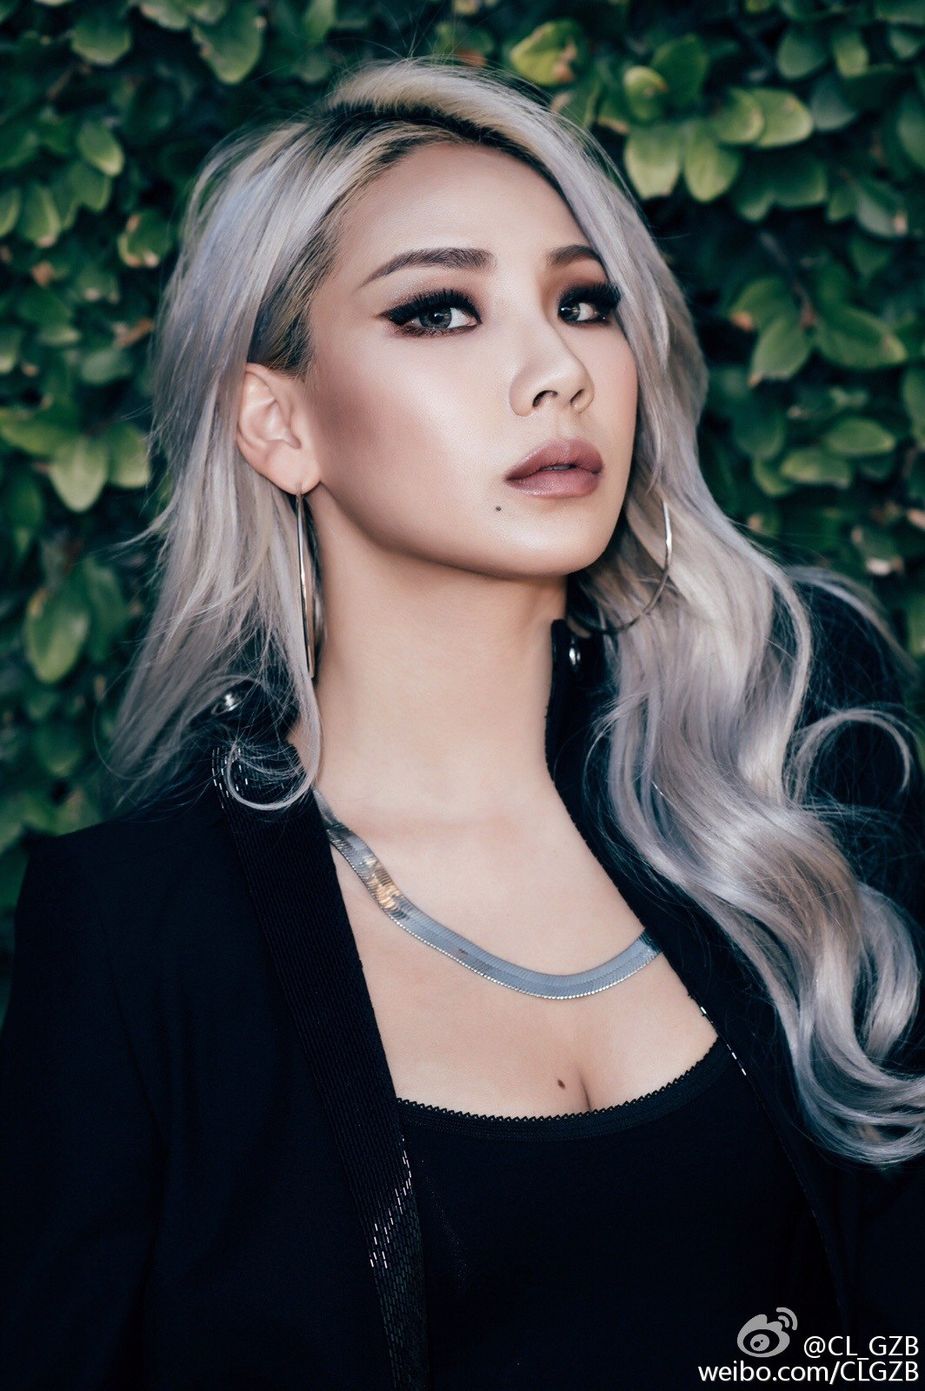 The baddest female is sharp, clean, and classy with her slight faded brow.